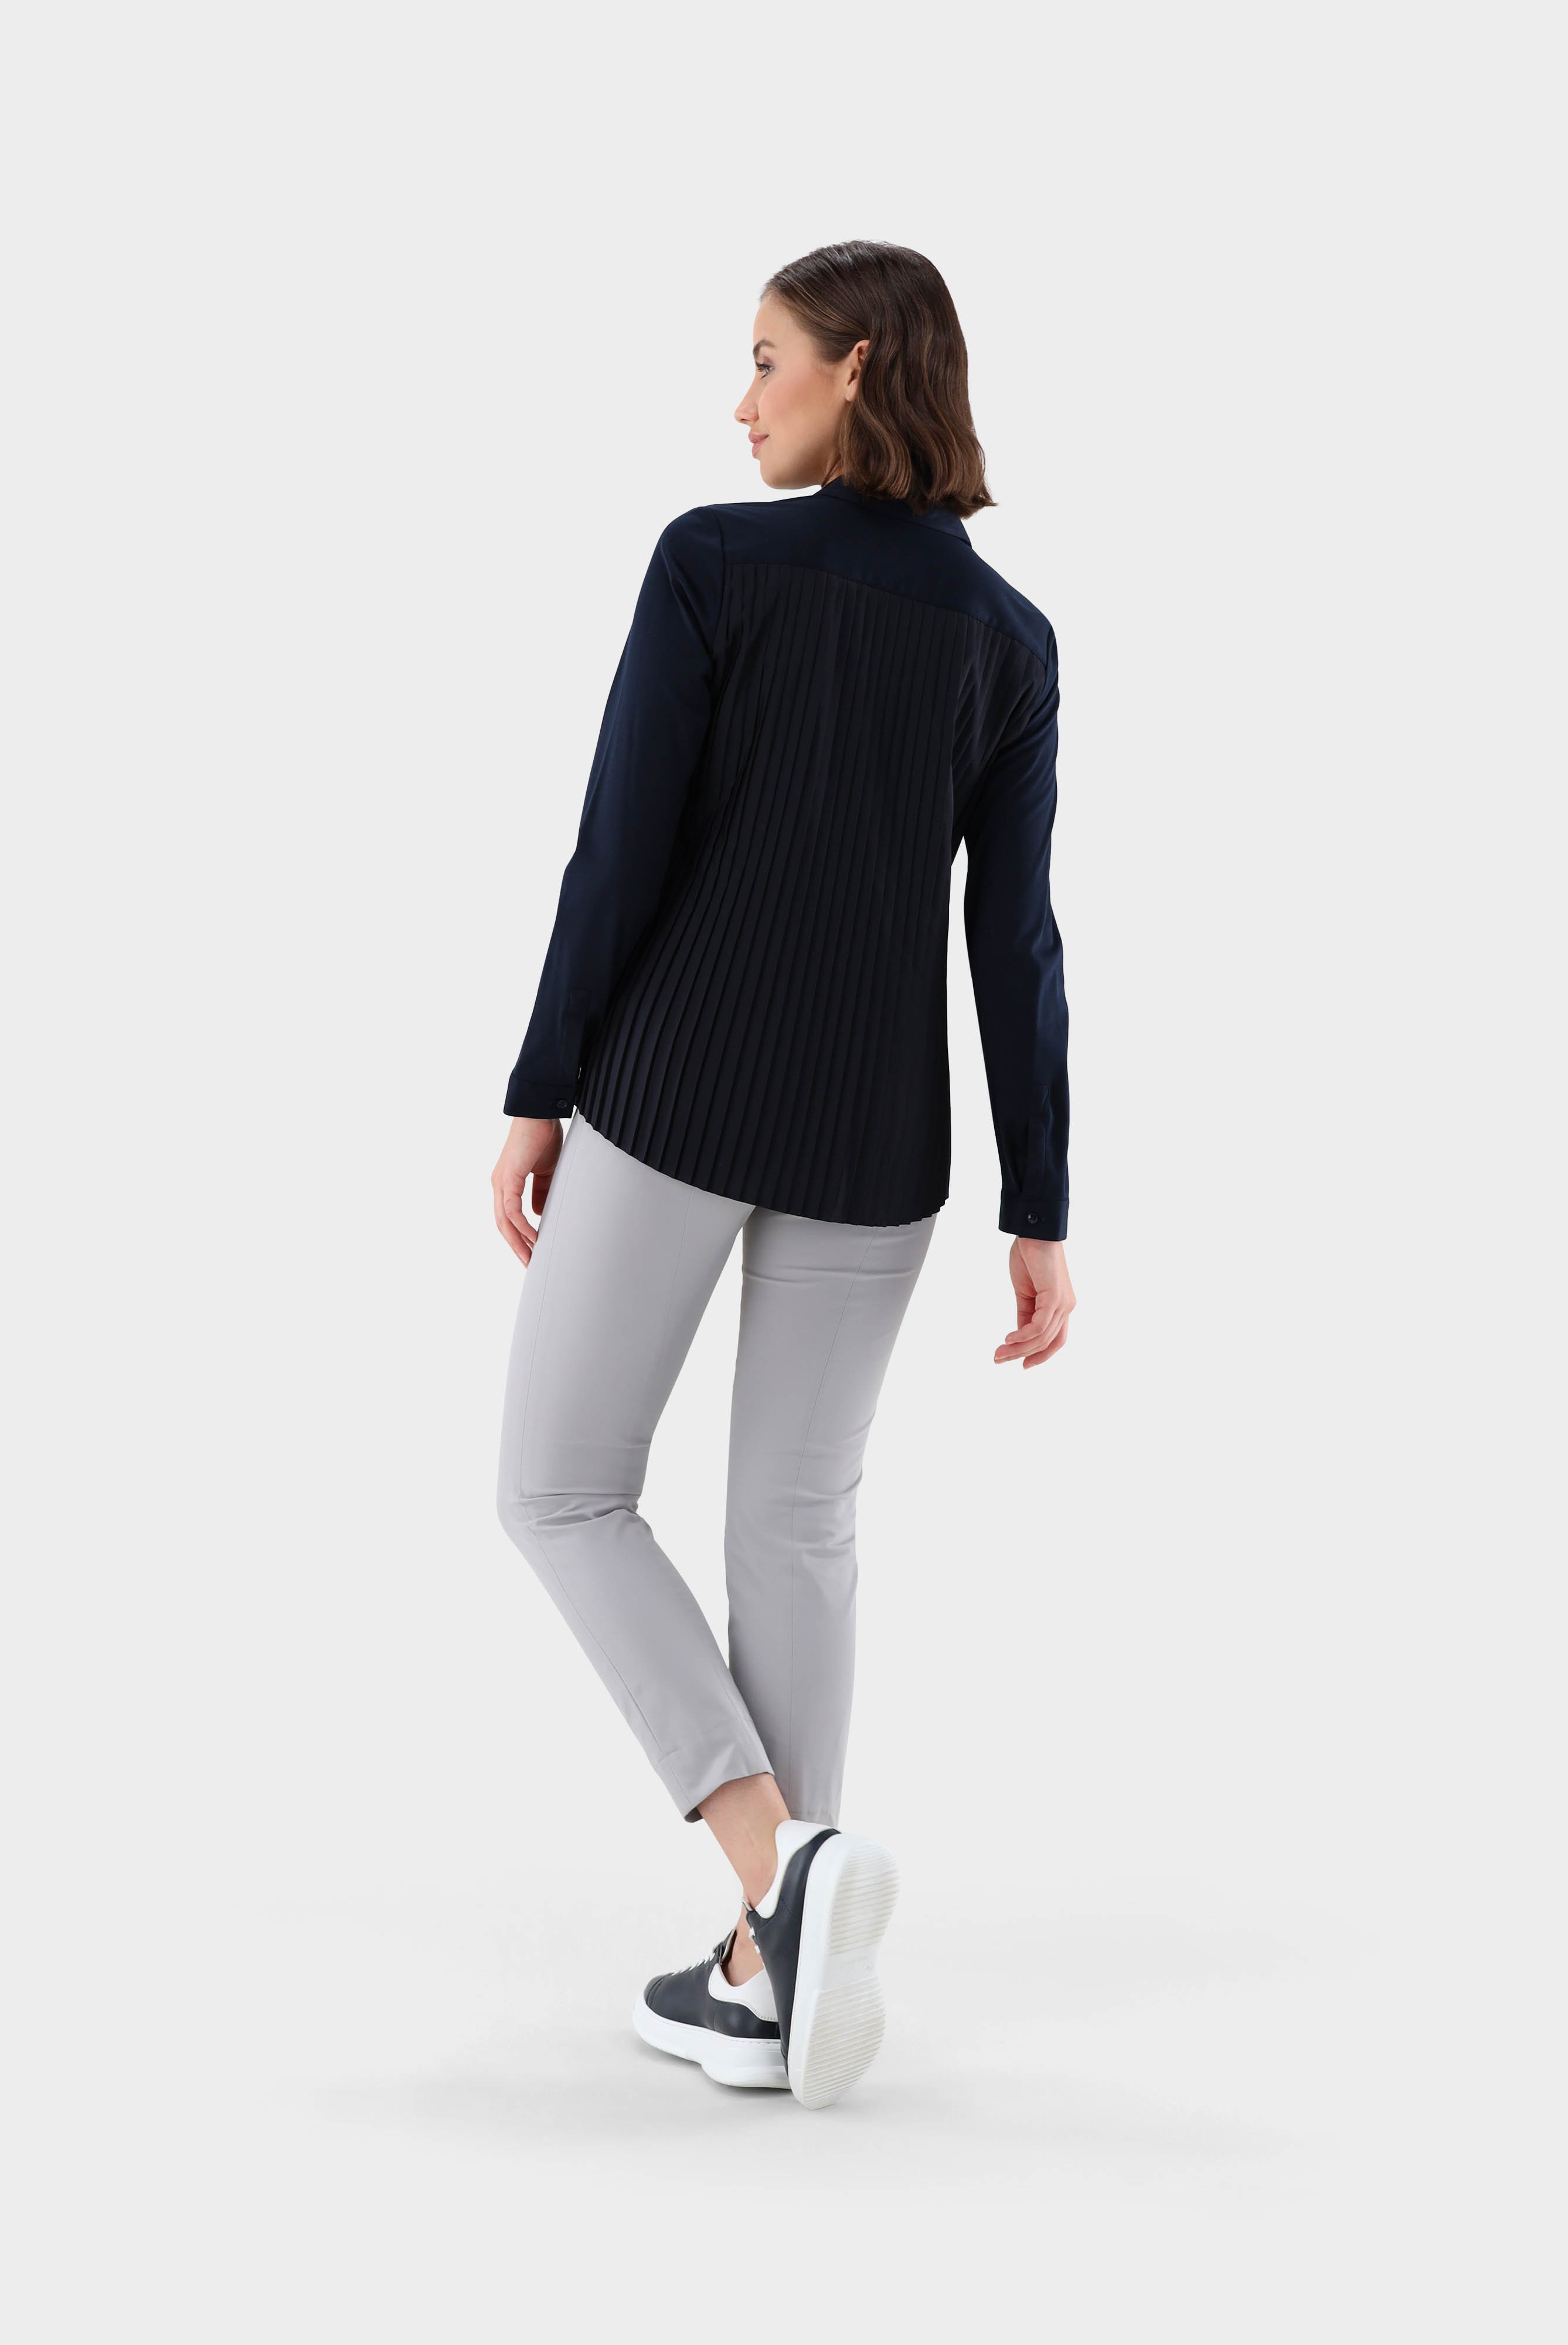 Jersey Blouses+Swiss Cotton Blouse with Pleated Back+05.6703.18.180031.790.46